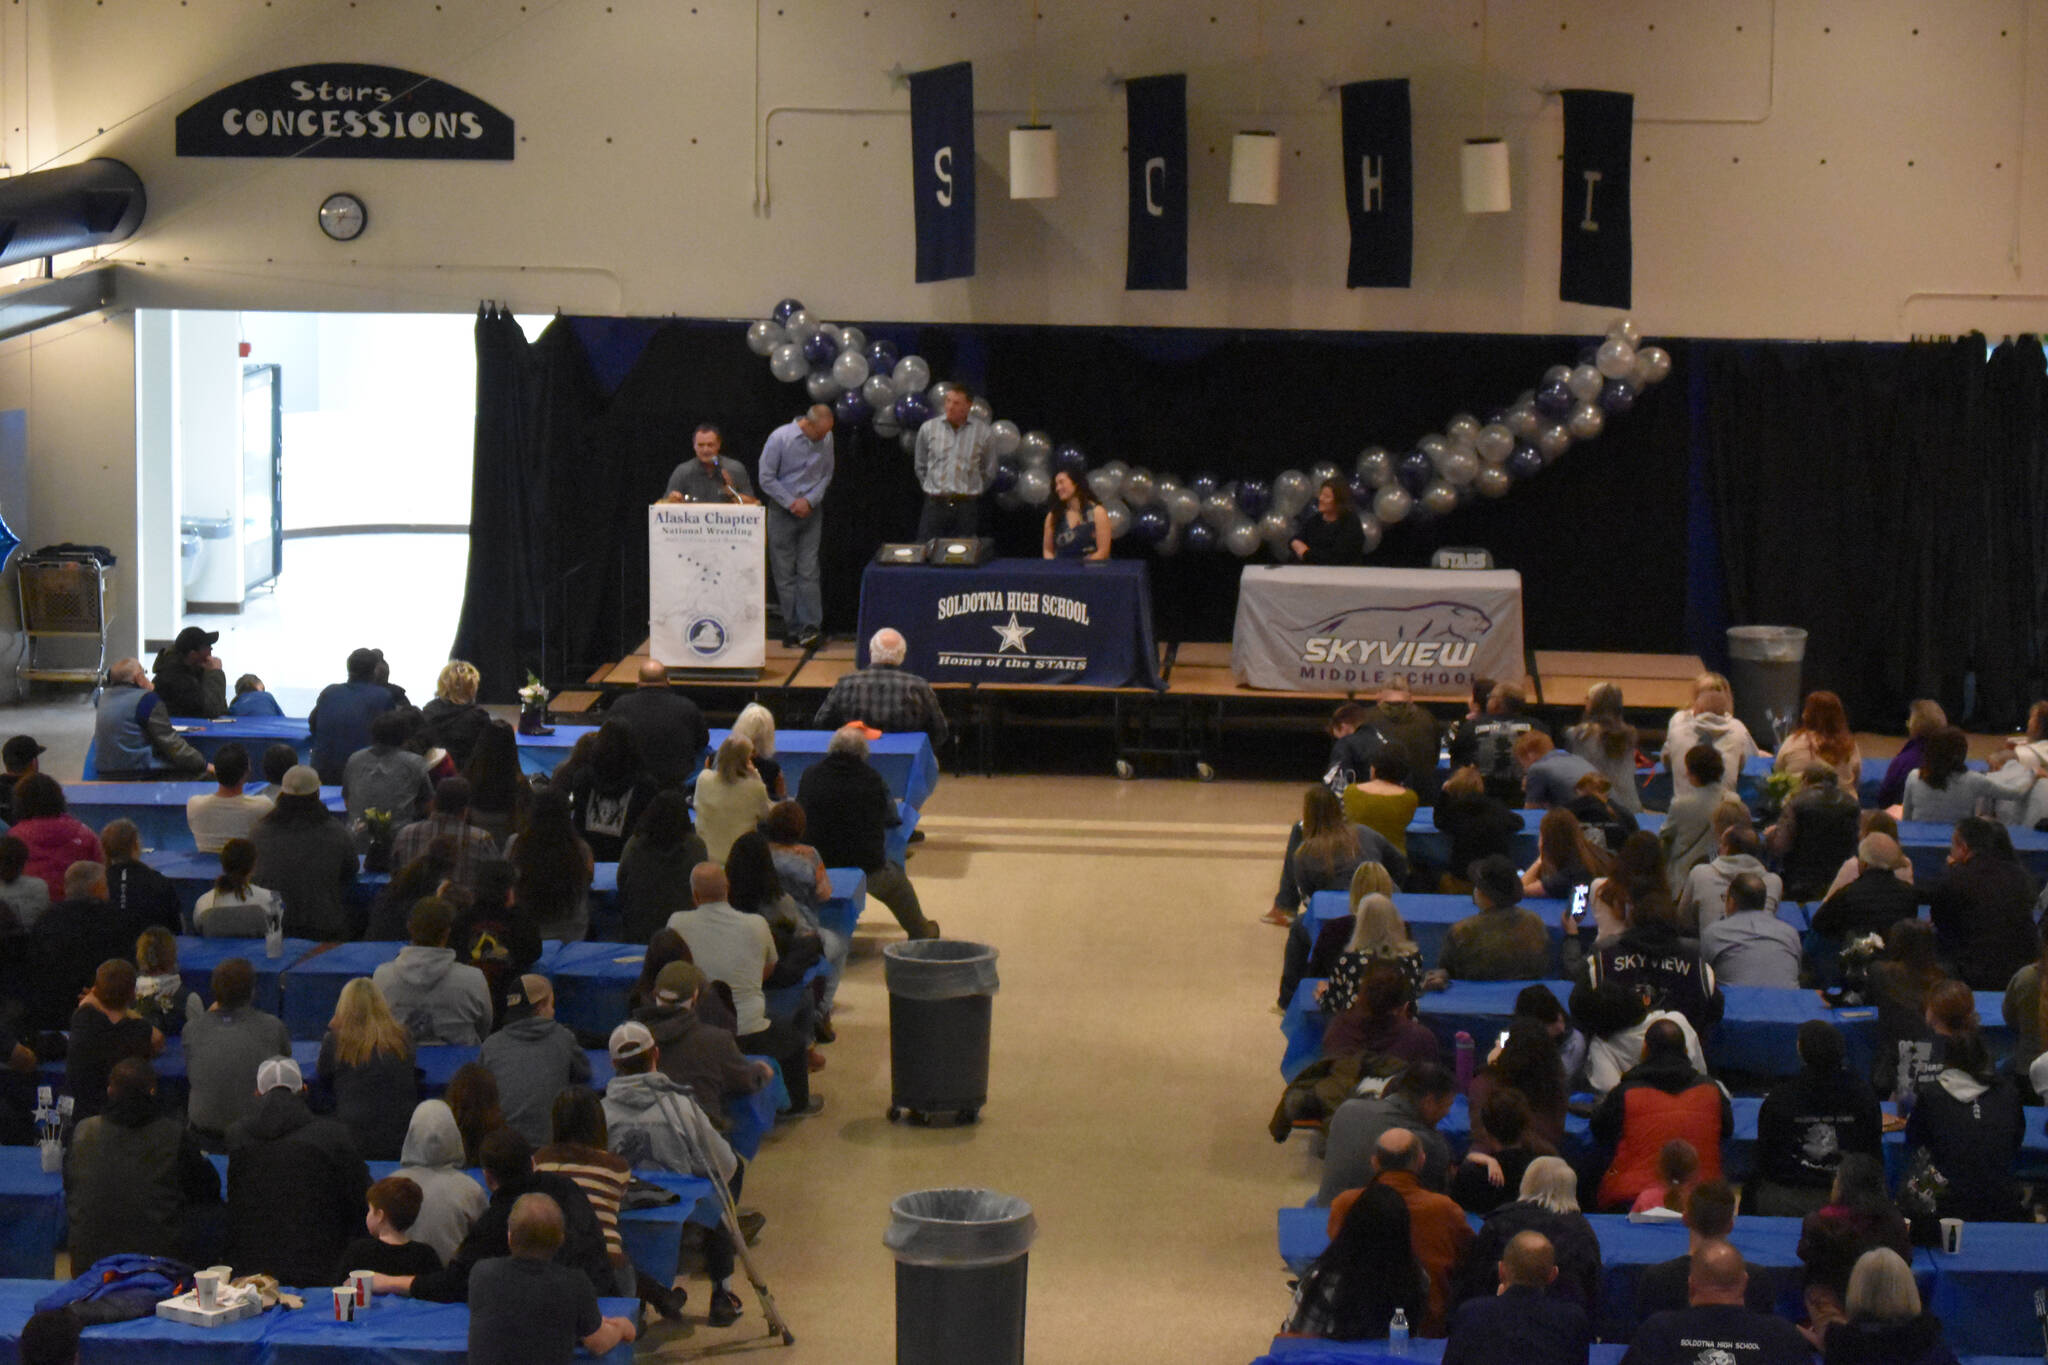 Hundreds of attendees view the induction of Tela O’Donnell-Bacher and Neldon Gardner to the National Wrestling Hall of Fame following a duel wrestling meet on Tuesday, Nov. 22, 2022, at Soldotna High School in Soldotna, Alaska. (Jake Dye/Peninsula Clarion)